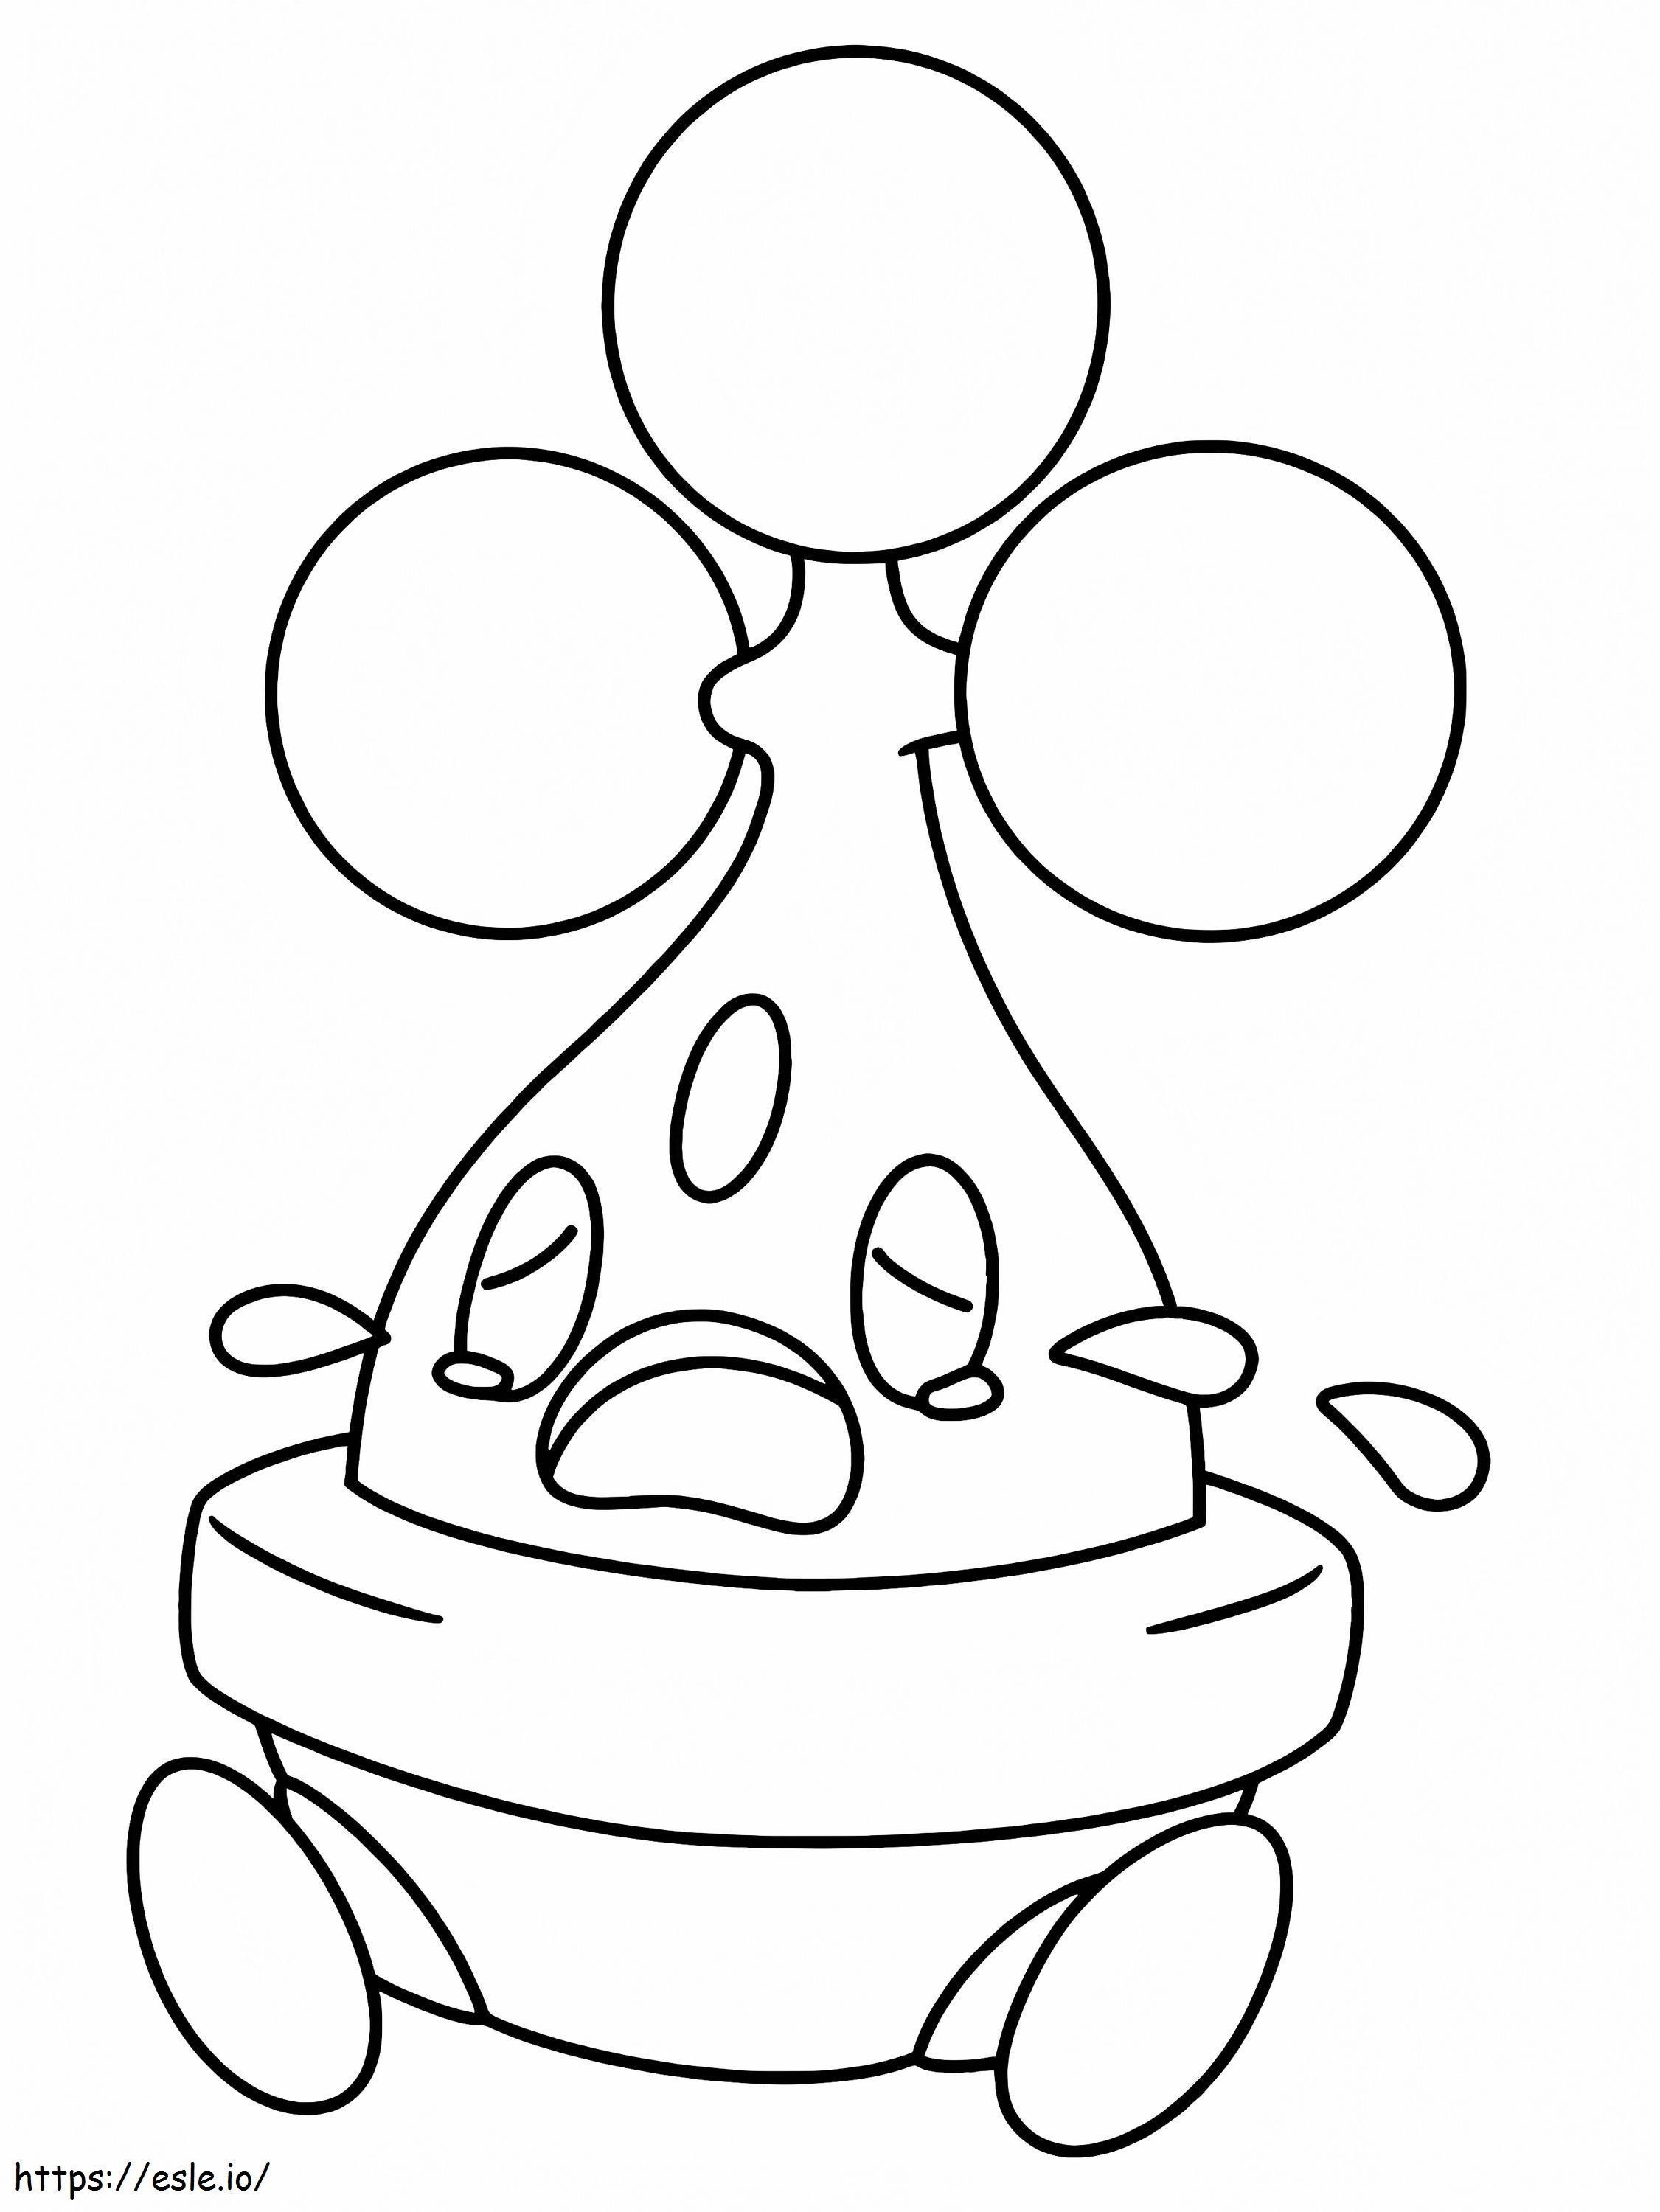 Bonsly Pokemon 4 coloring page